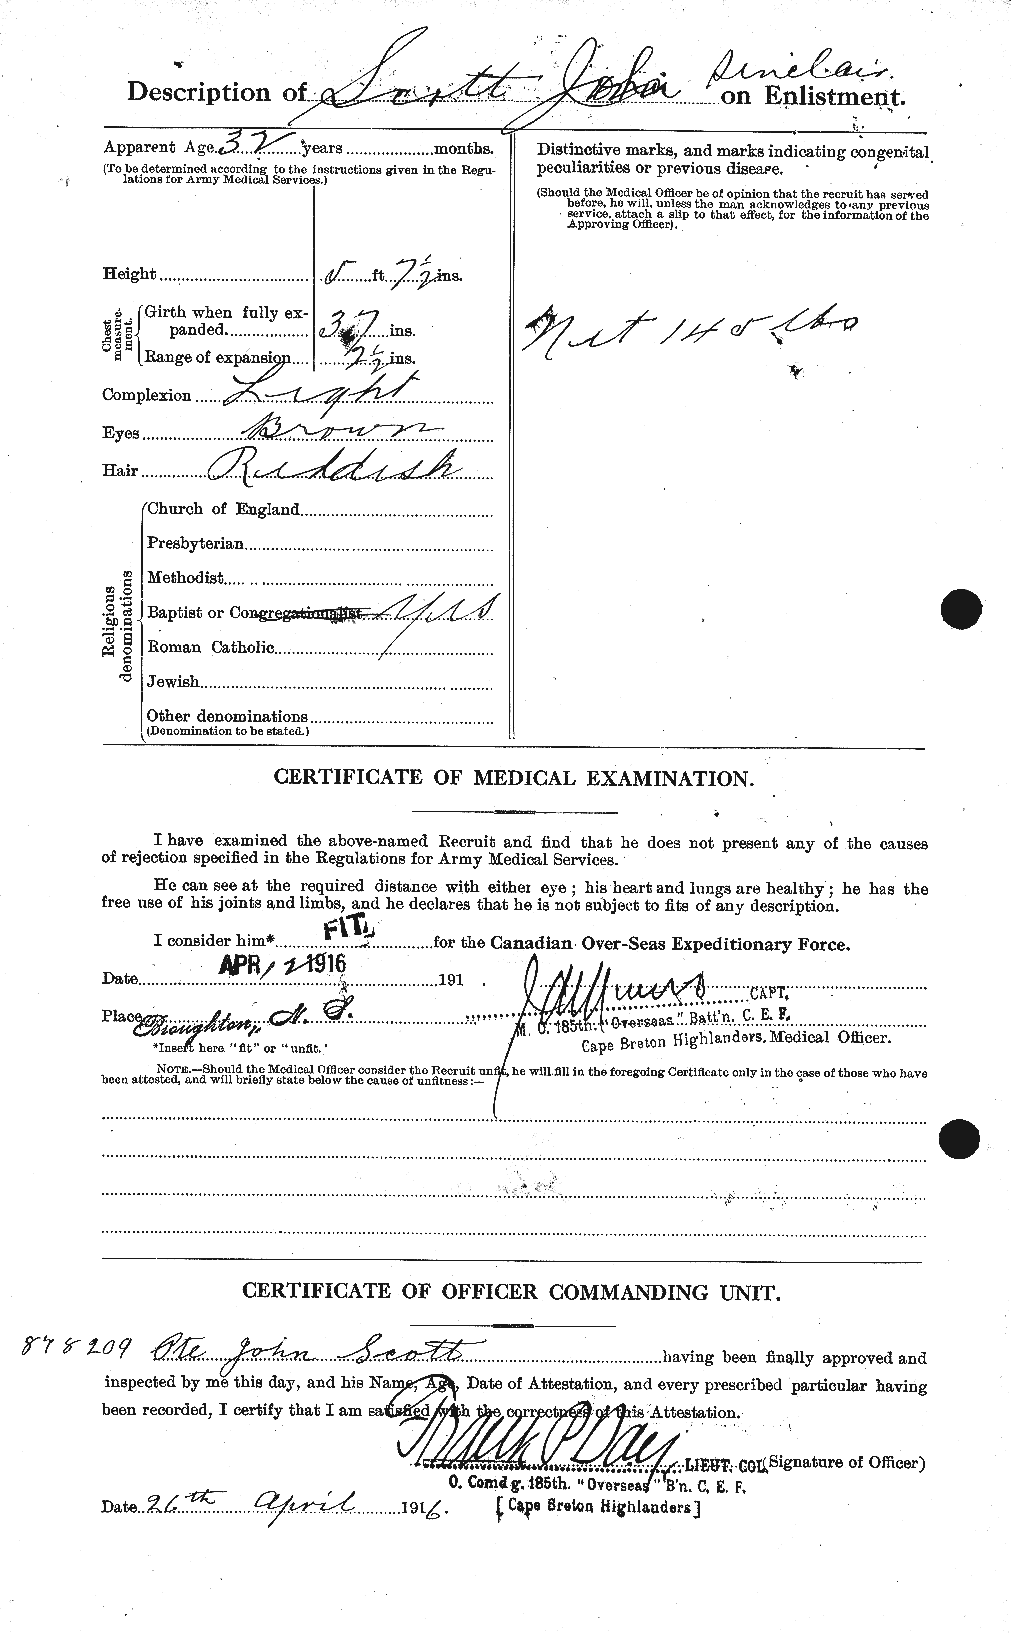 Personnel Records of the First World War - CEF 084426b